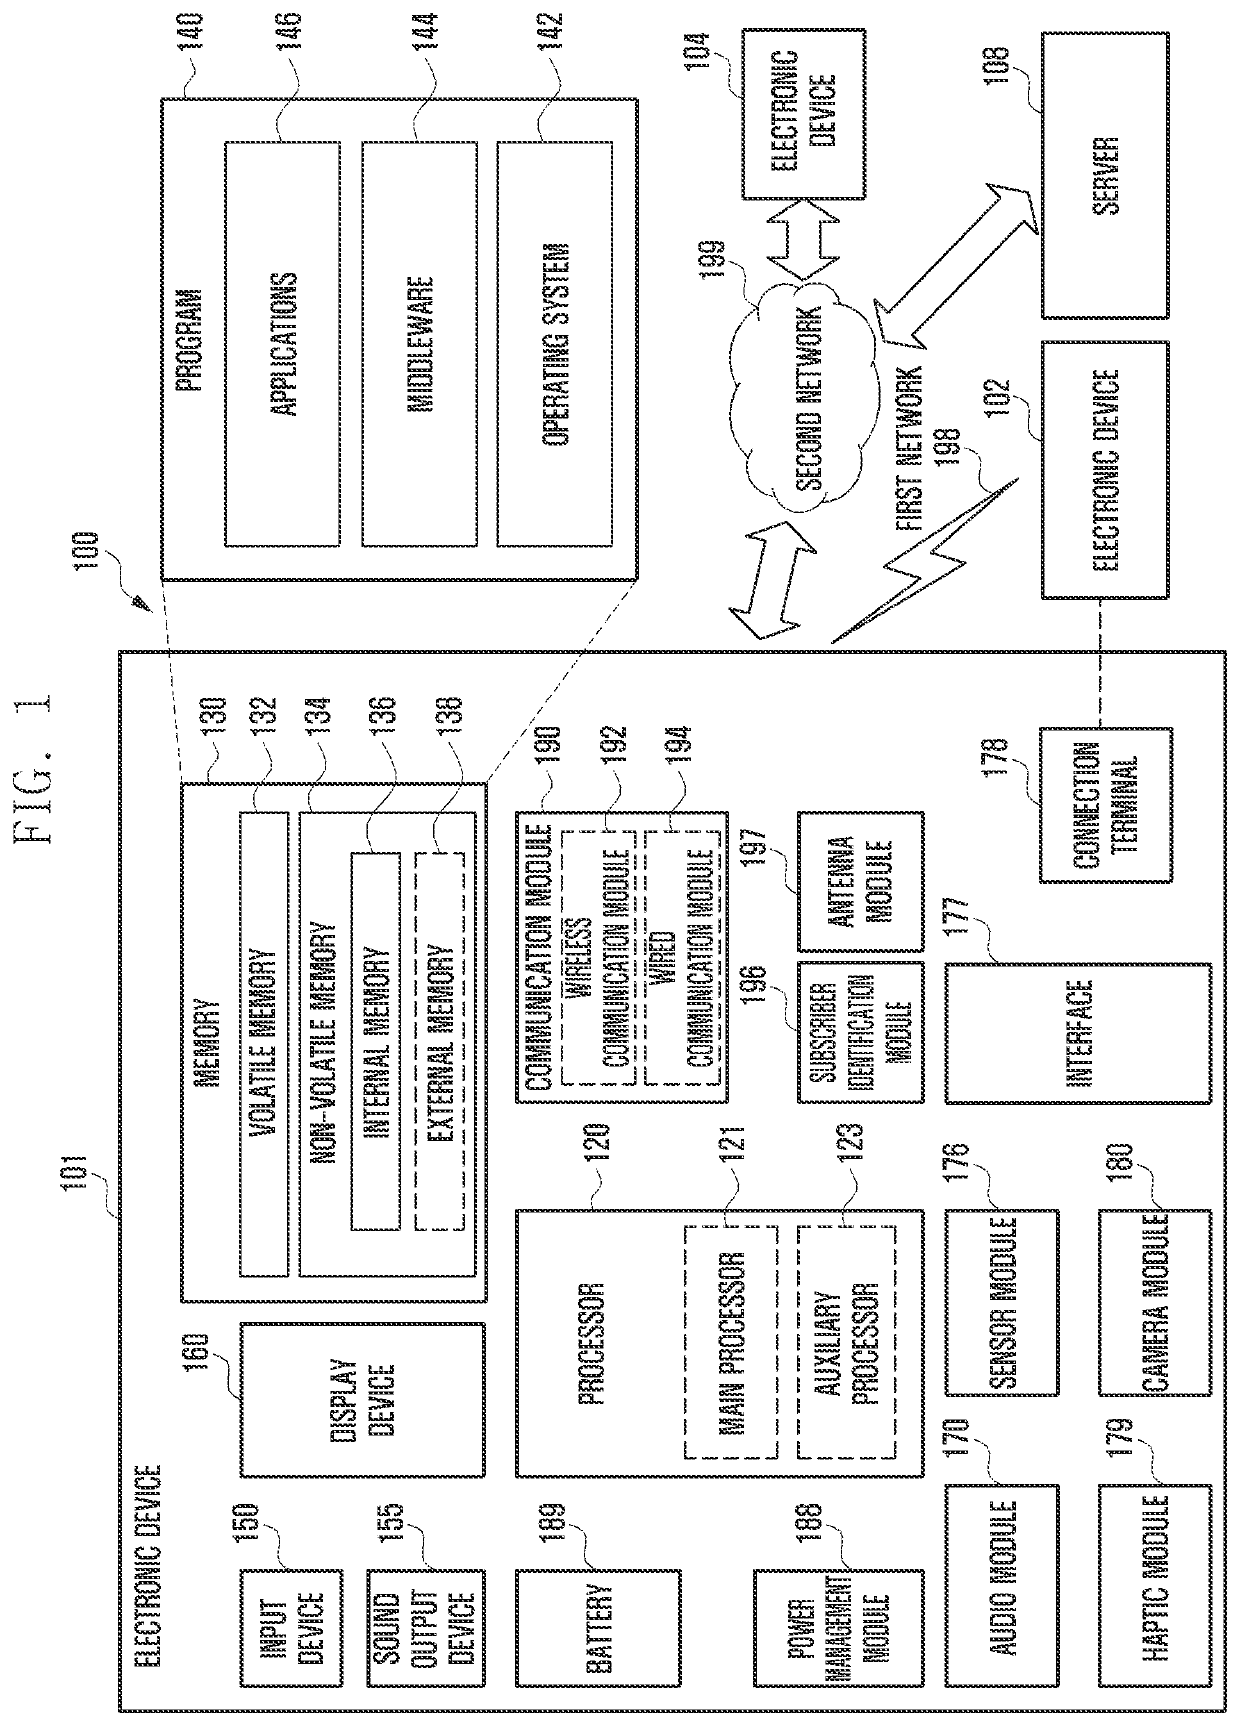 Method and device for displaying 3D augmented reality navigation information